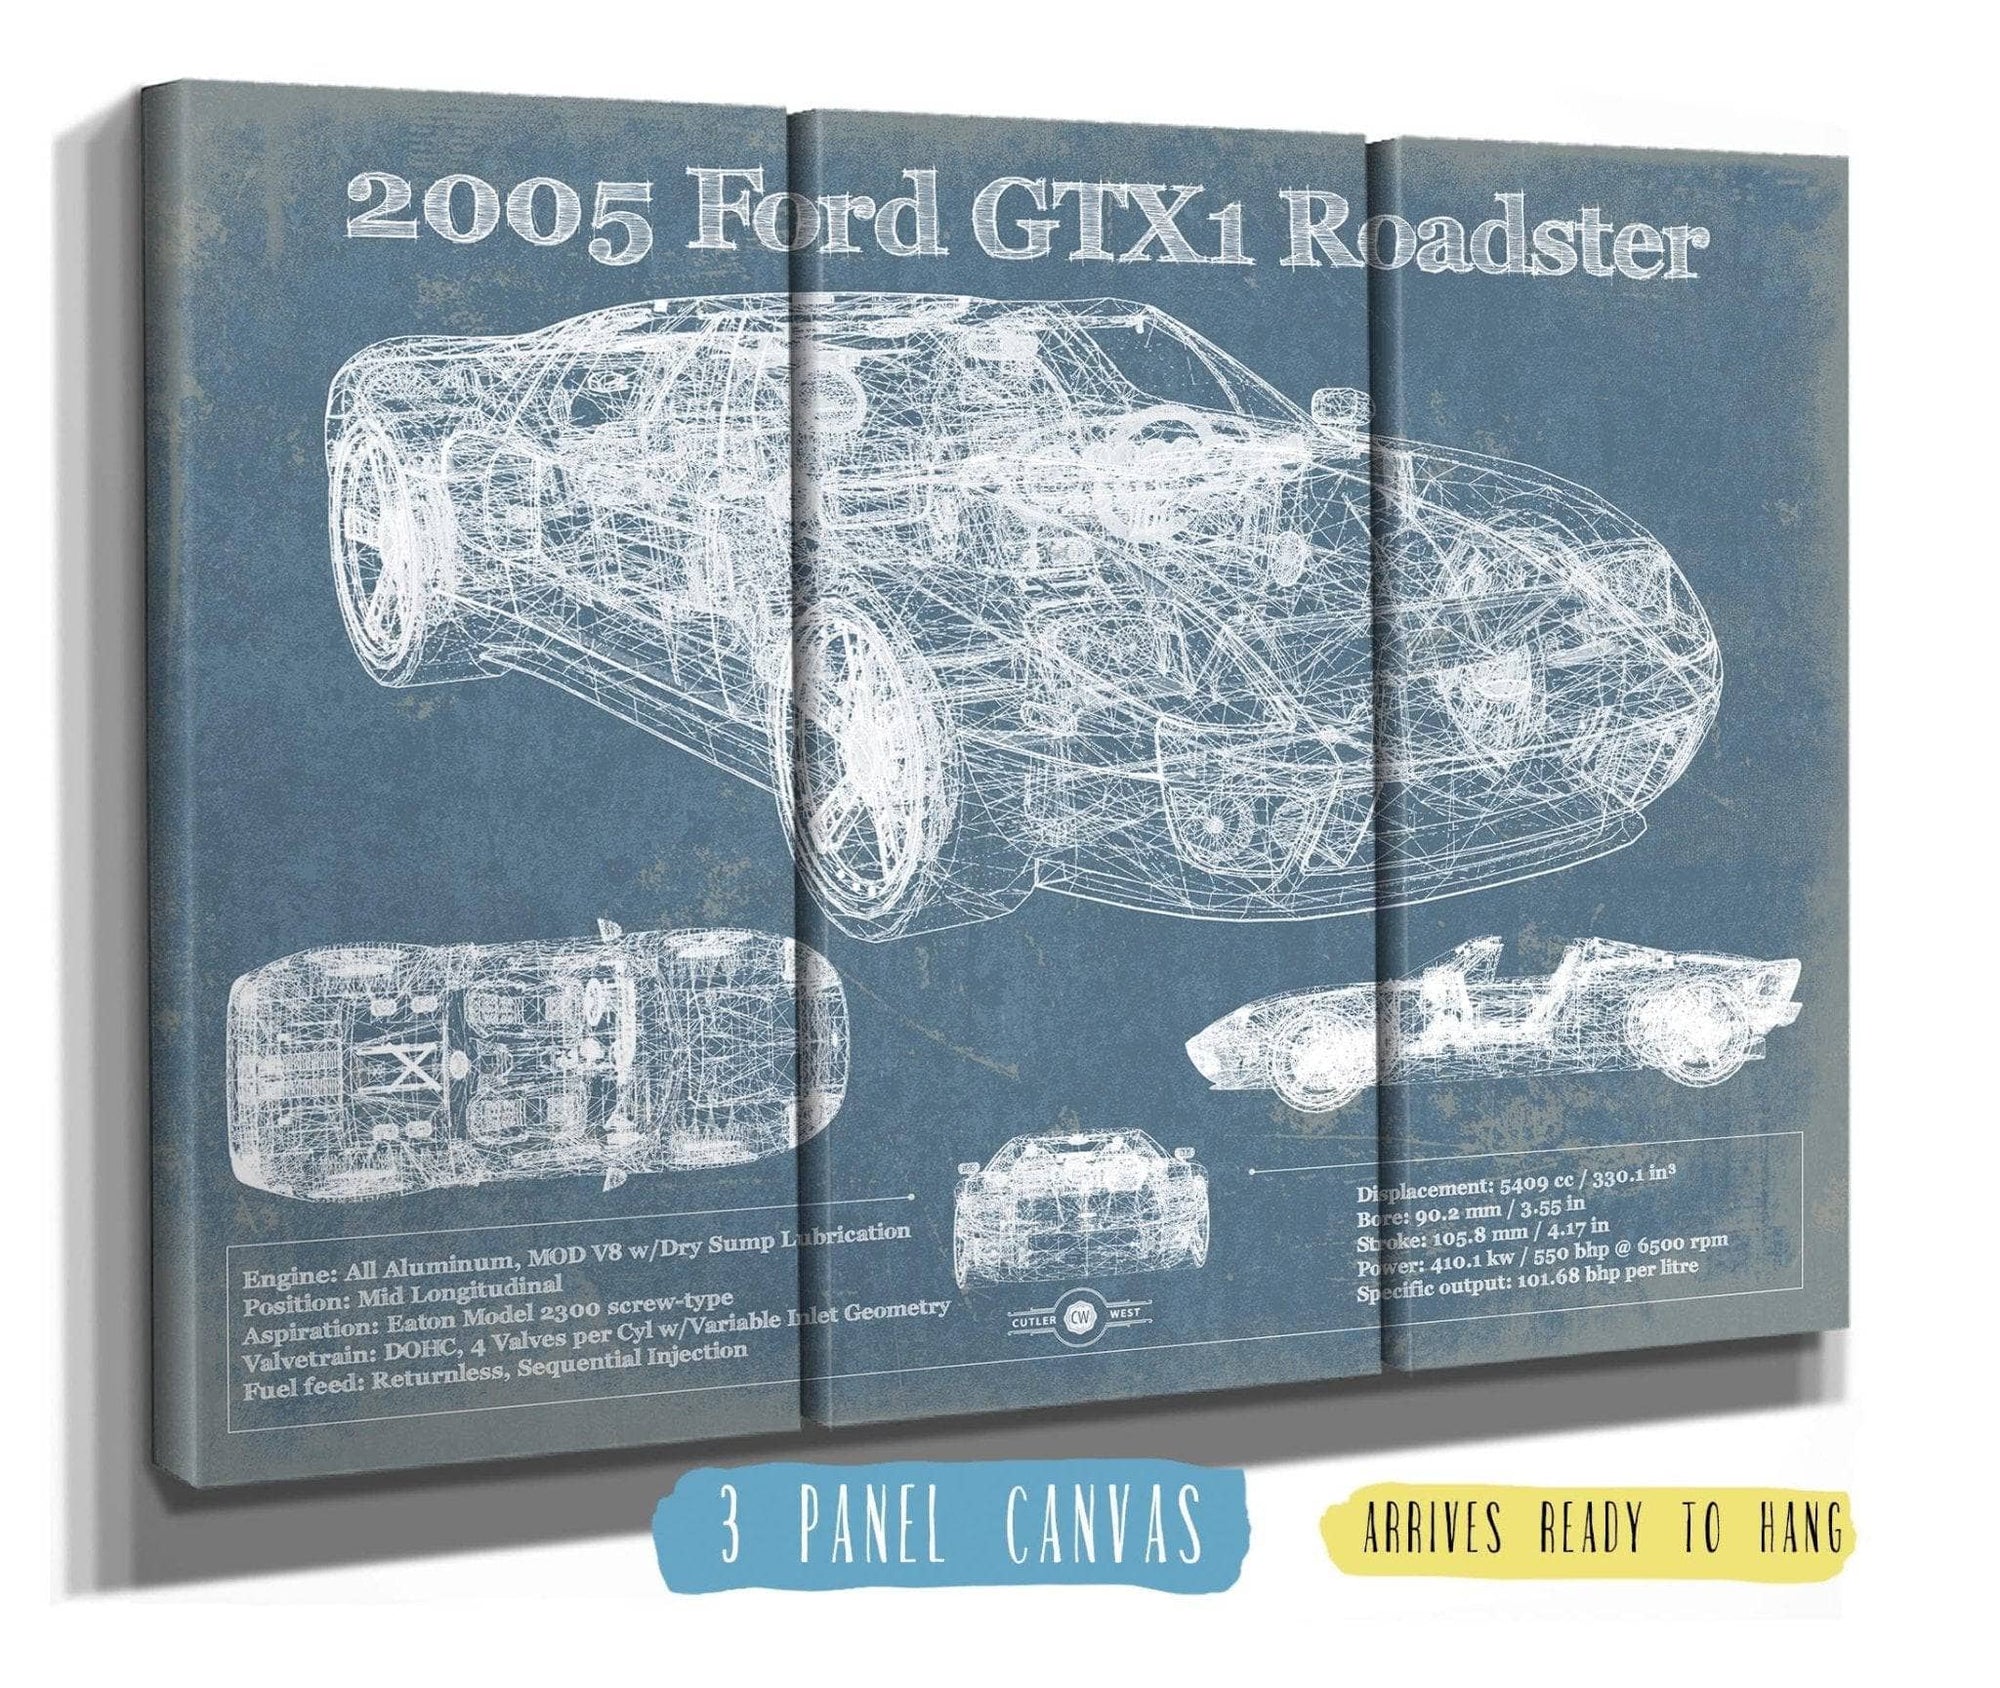 Cutler West Ford Collection 48" x 32" / 3 Panel Canvas Wrap 2005 Ford GTX1 Roadster Vintage Blueprint Auto Print 933350037_17784